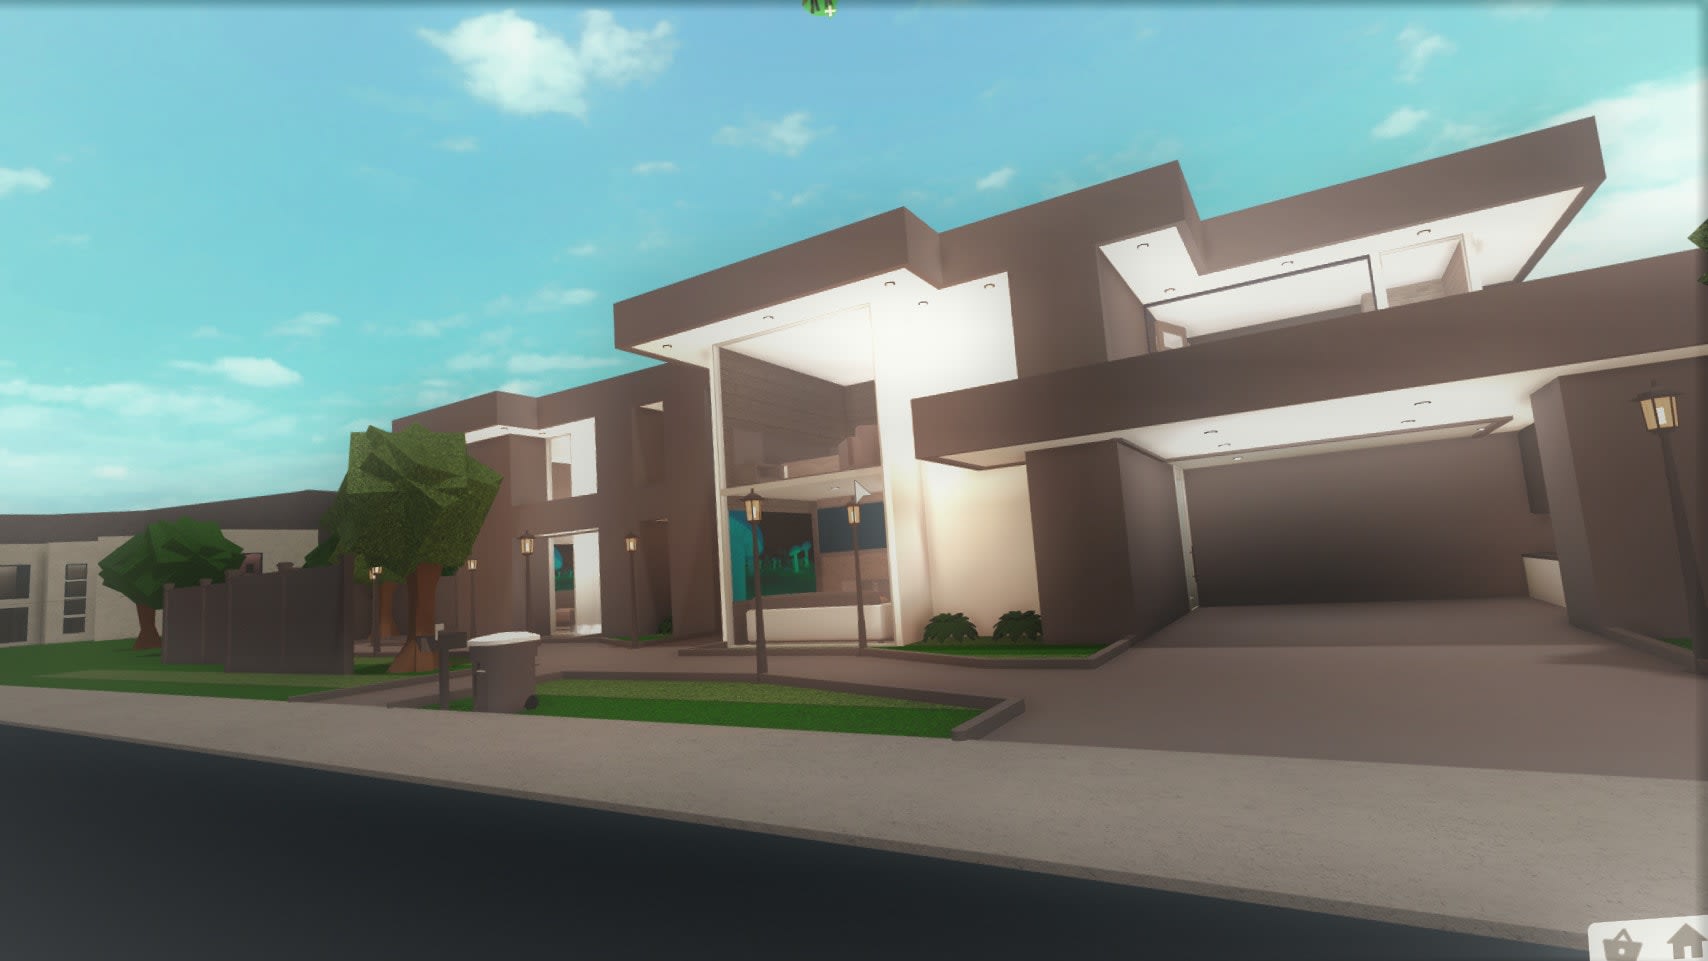 Build You A Roblox Bloxburg House For Cheap By Baggins125 - pictures of roblox bloxburg houses (cheap)